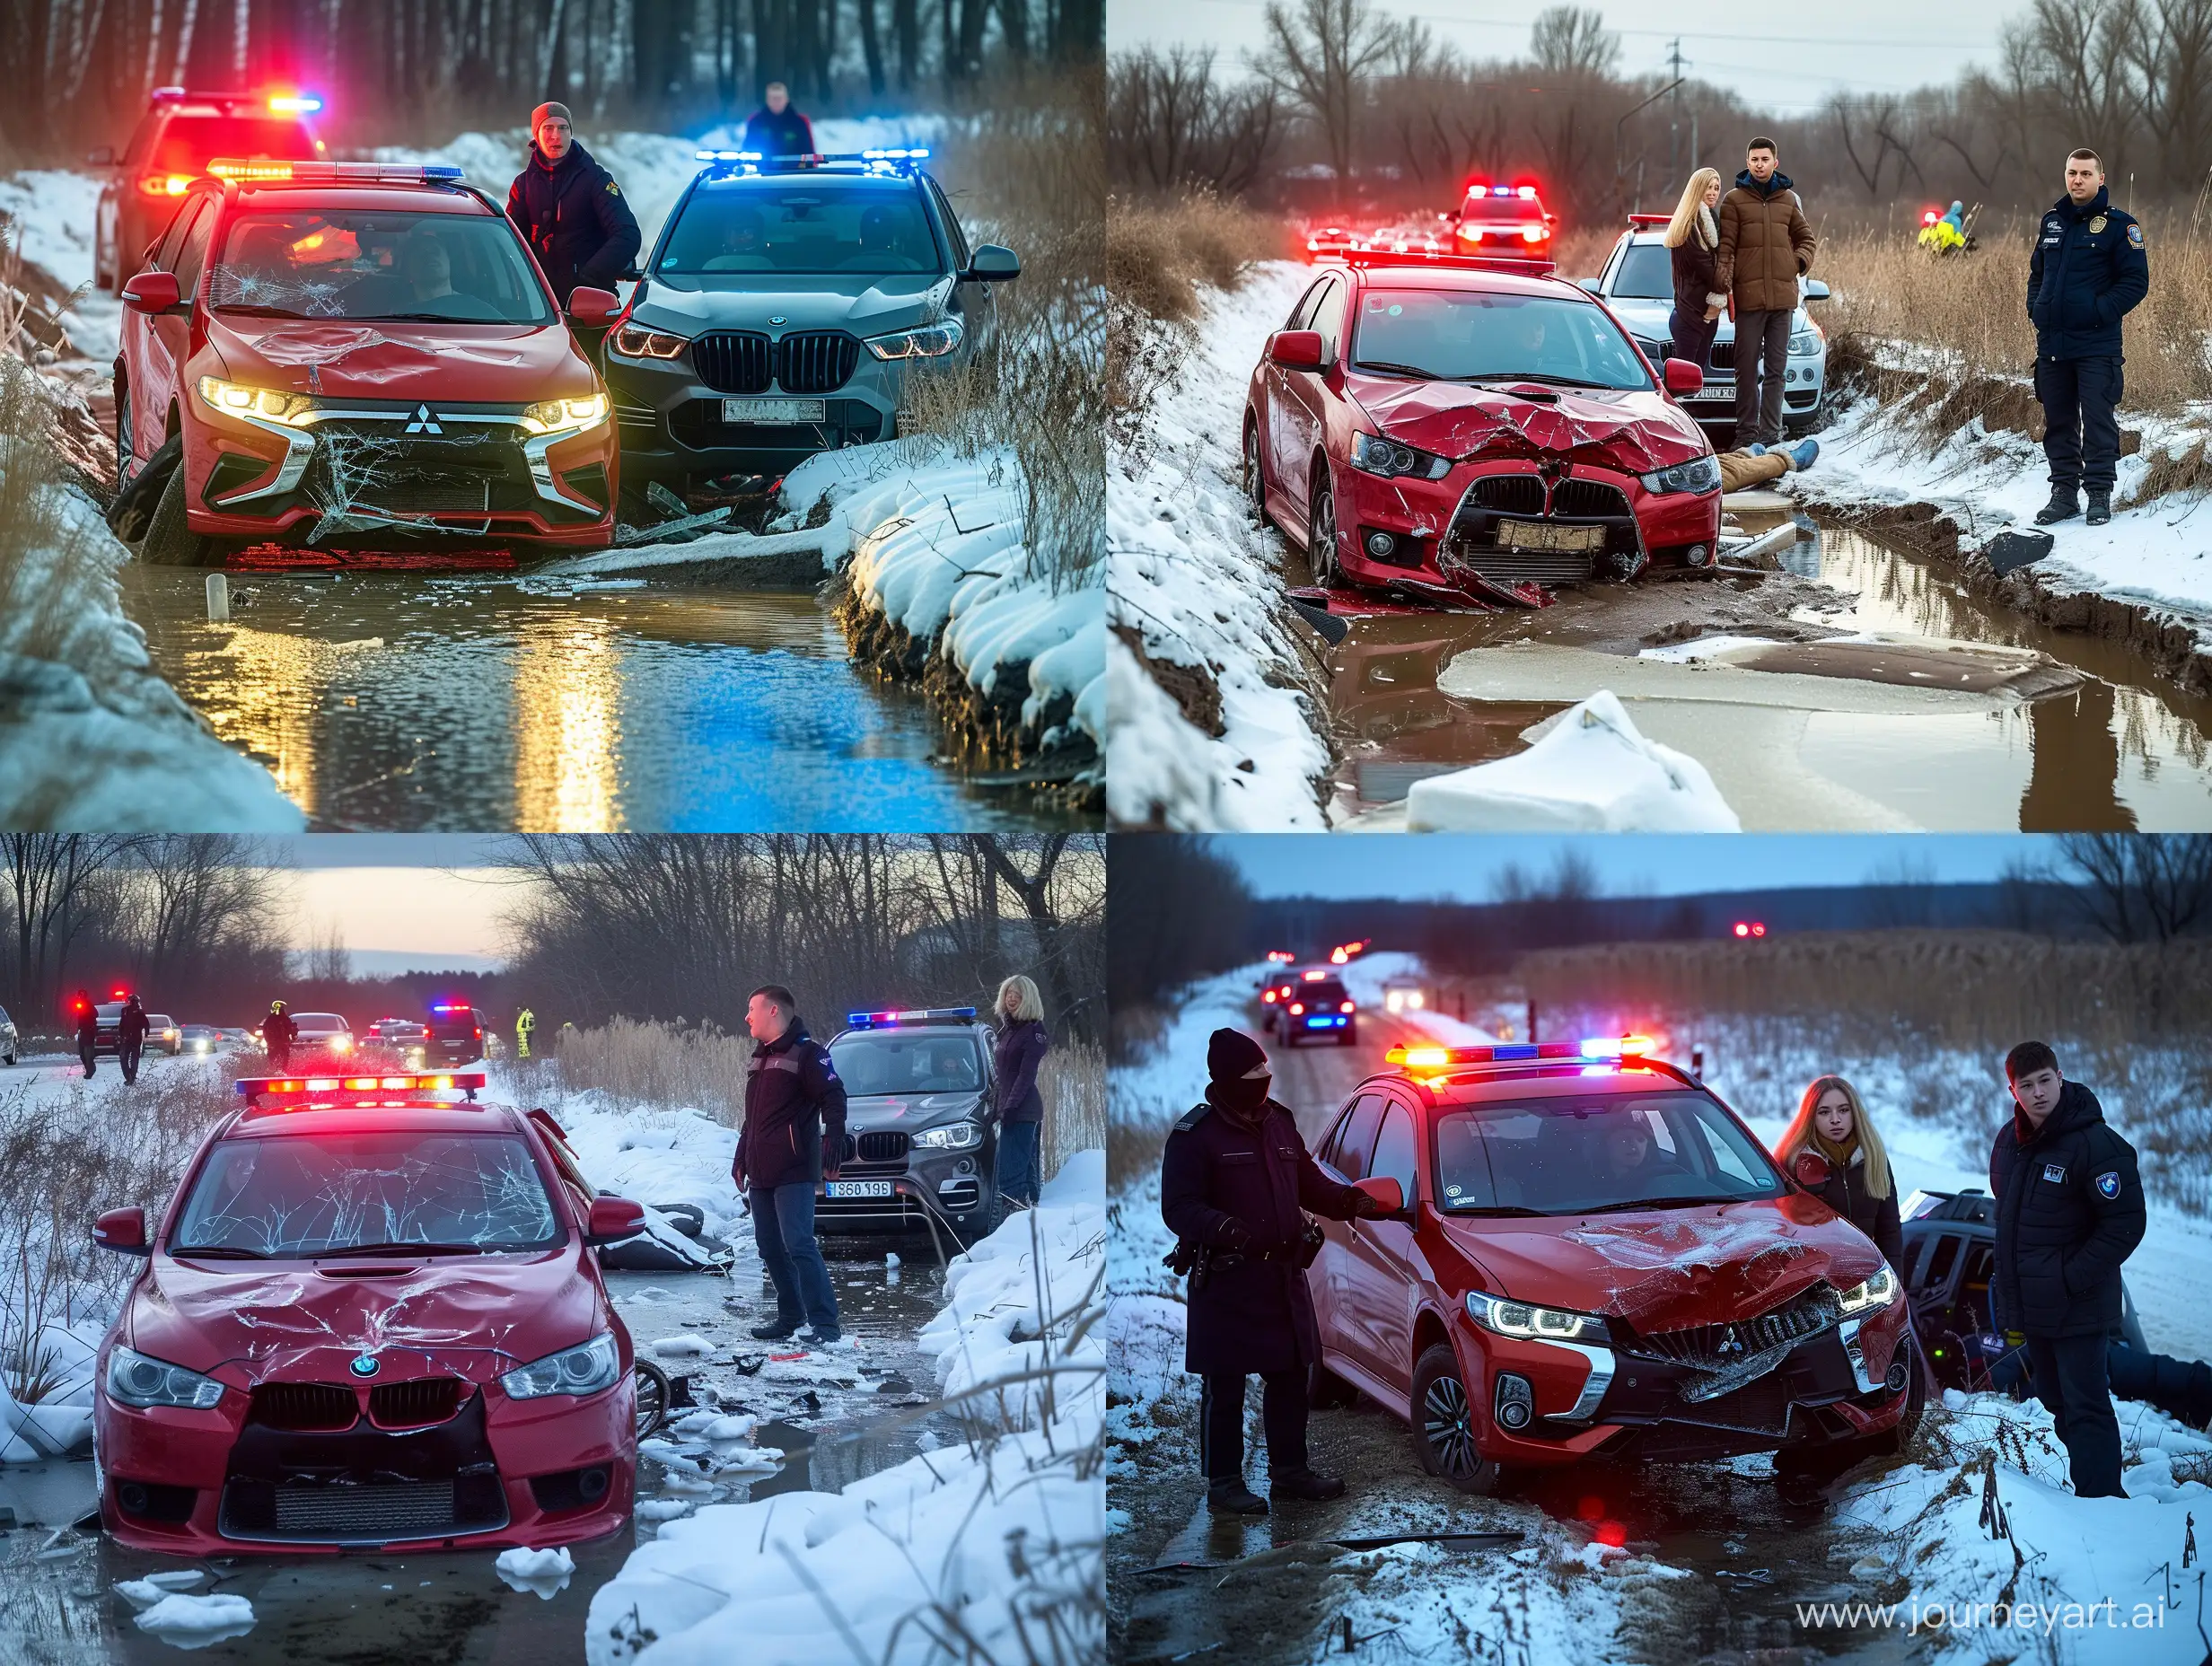 An accident in winter in Russia, a red Mitsubishi lancer 10 crashed into the back of a new BMW x5, a guy was driving a Mitsubishi, the passengers were: a blonde girl and a tall brunette guy. There are police with flashing lights nearby. Lancer's front is broken. The BMW is lying in a ditch.